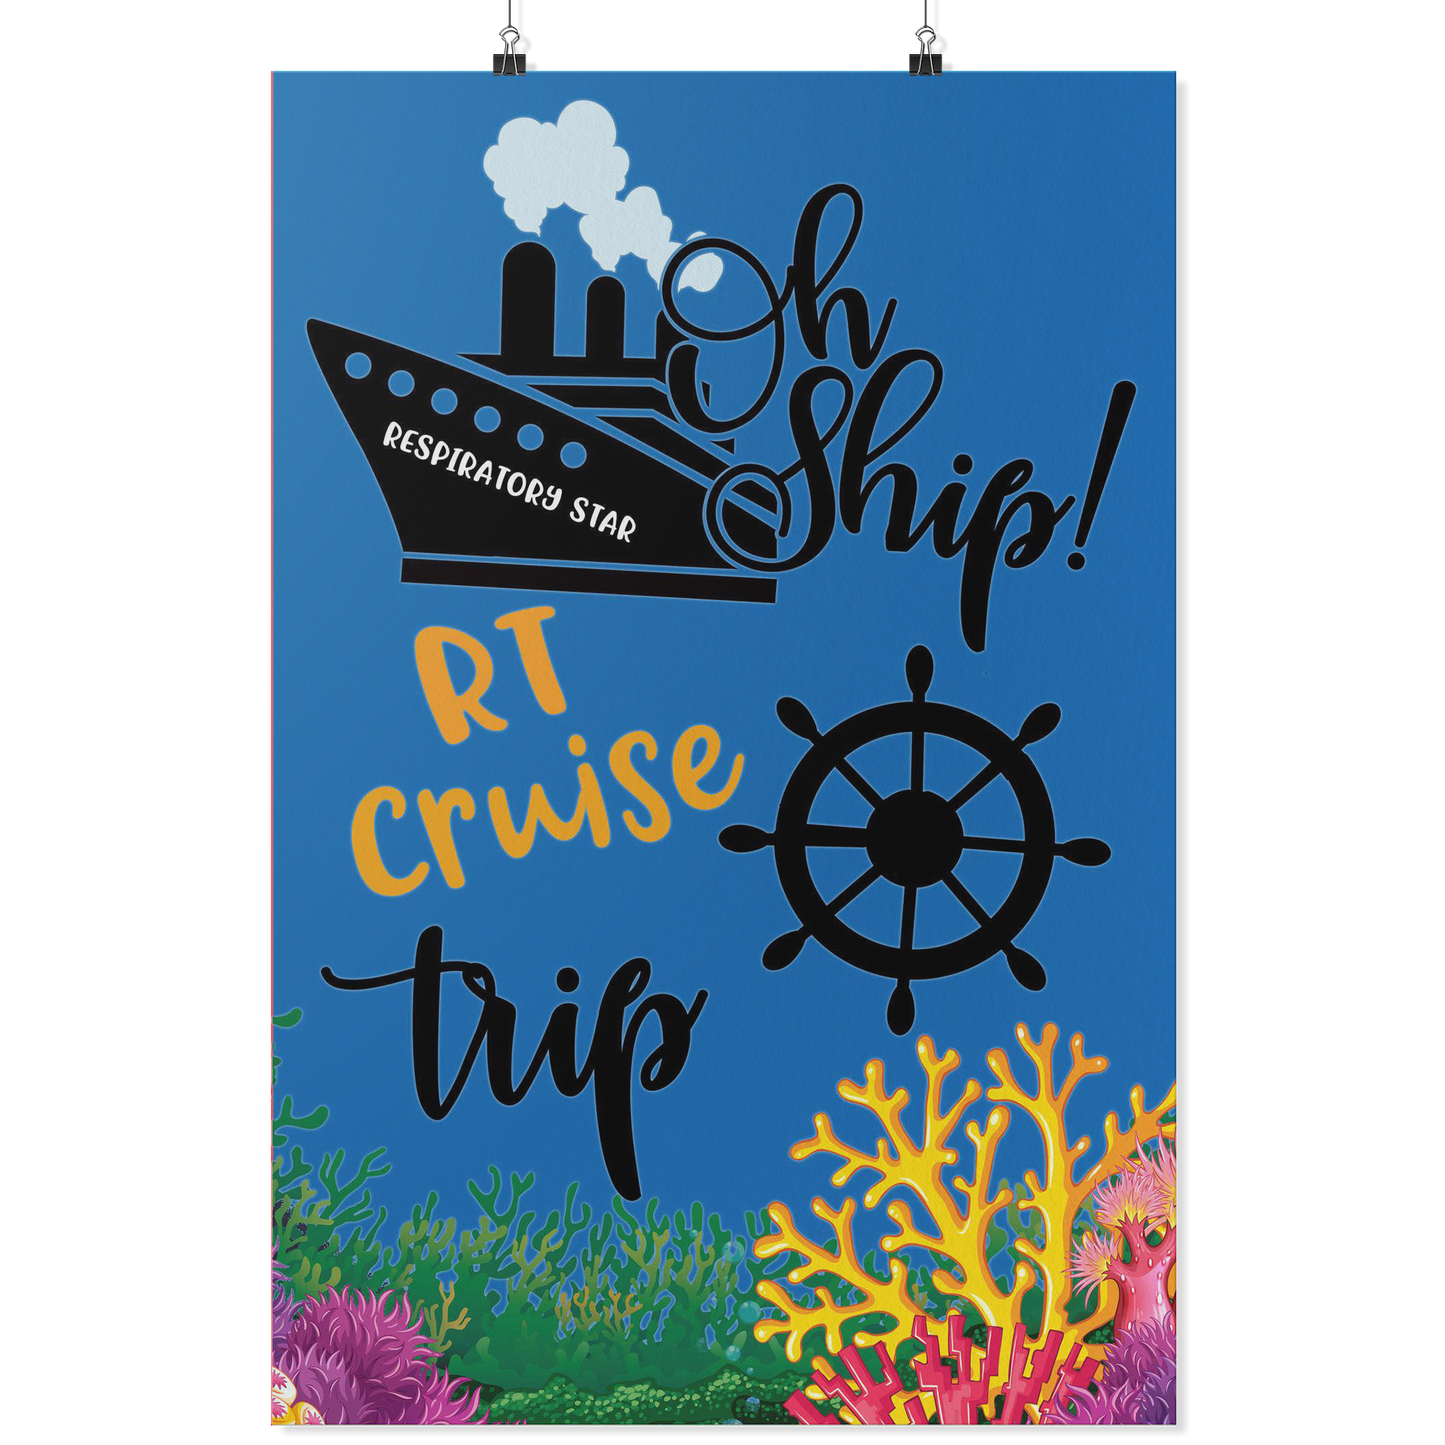 RT Swag | RT Cruise Ship Door Poster | RT Life | Cruise Vacation - Posters